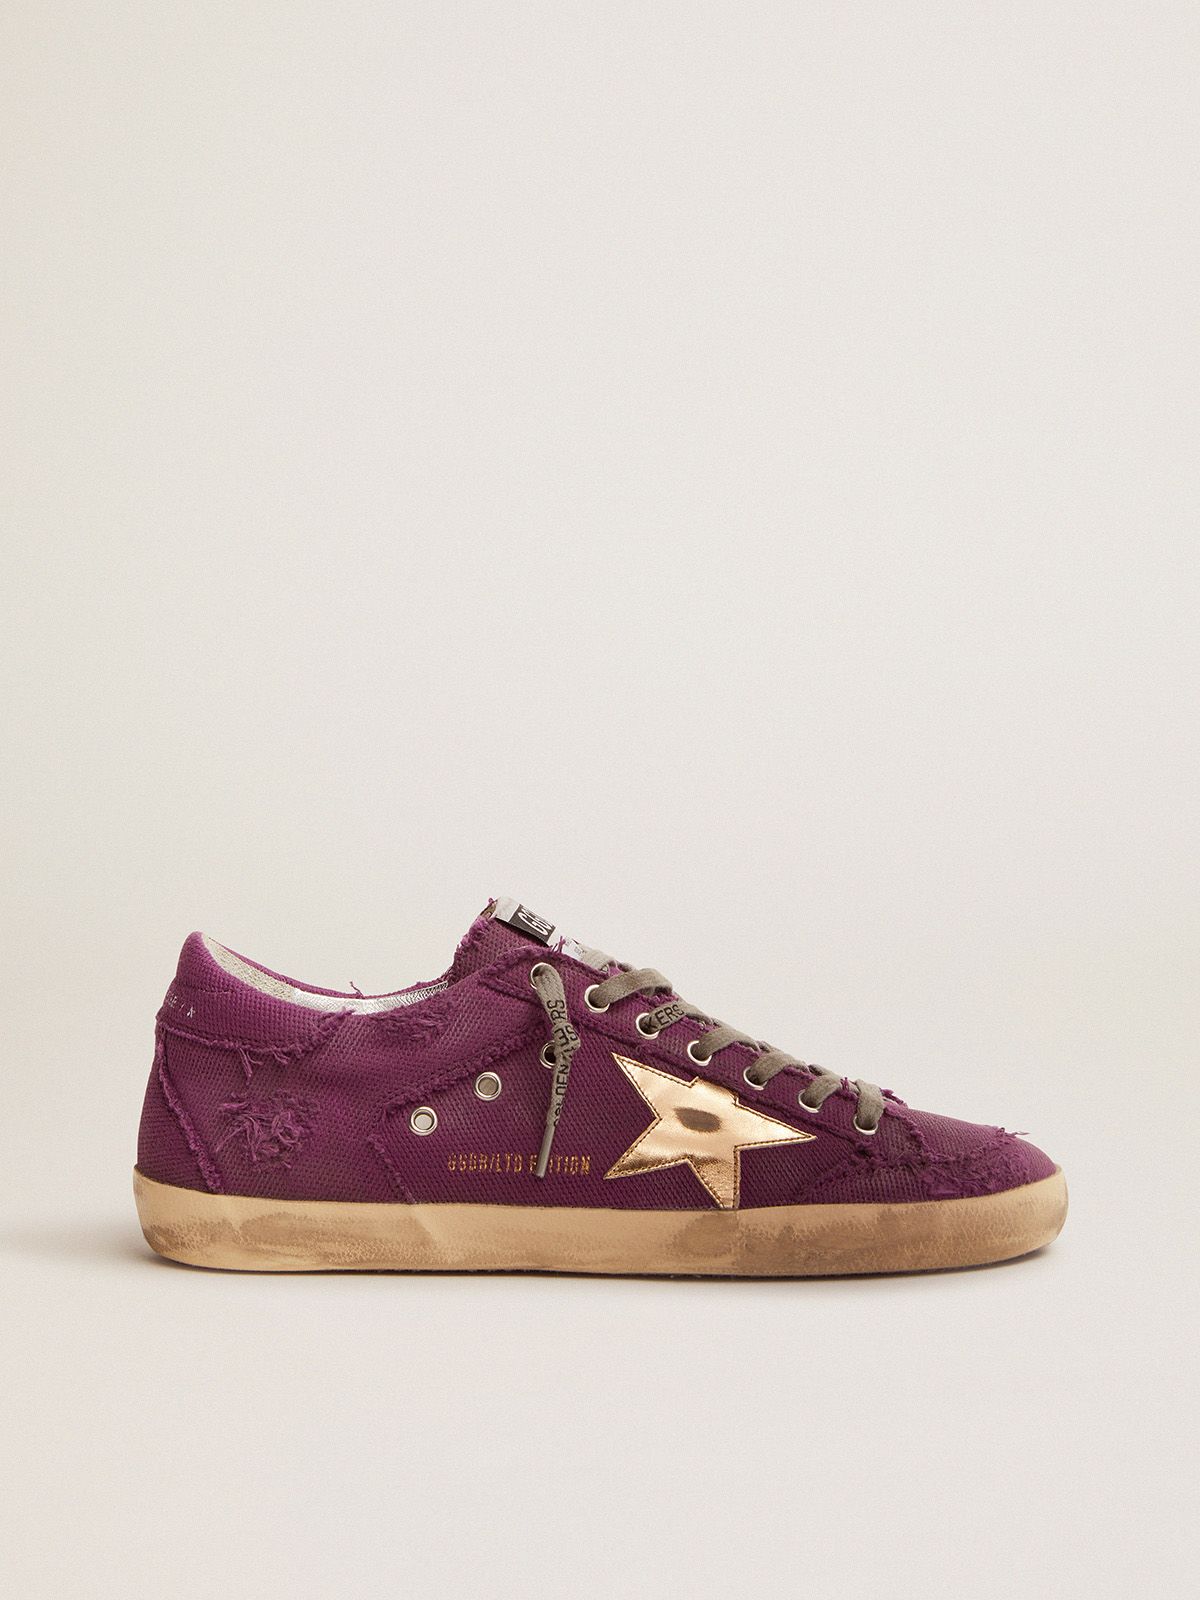 golden goose gold purple star LAB distressed laminated in canvas Super-Star Penstar sneakers with leather